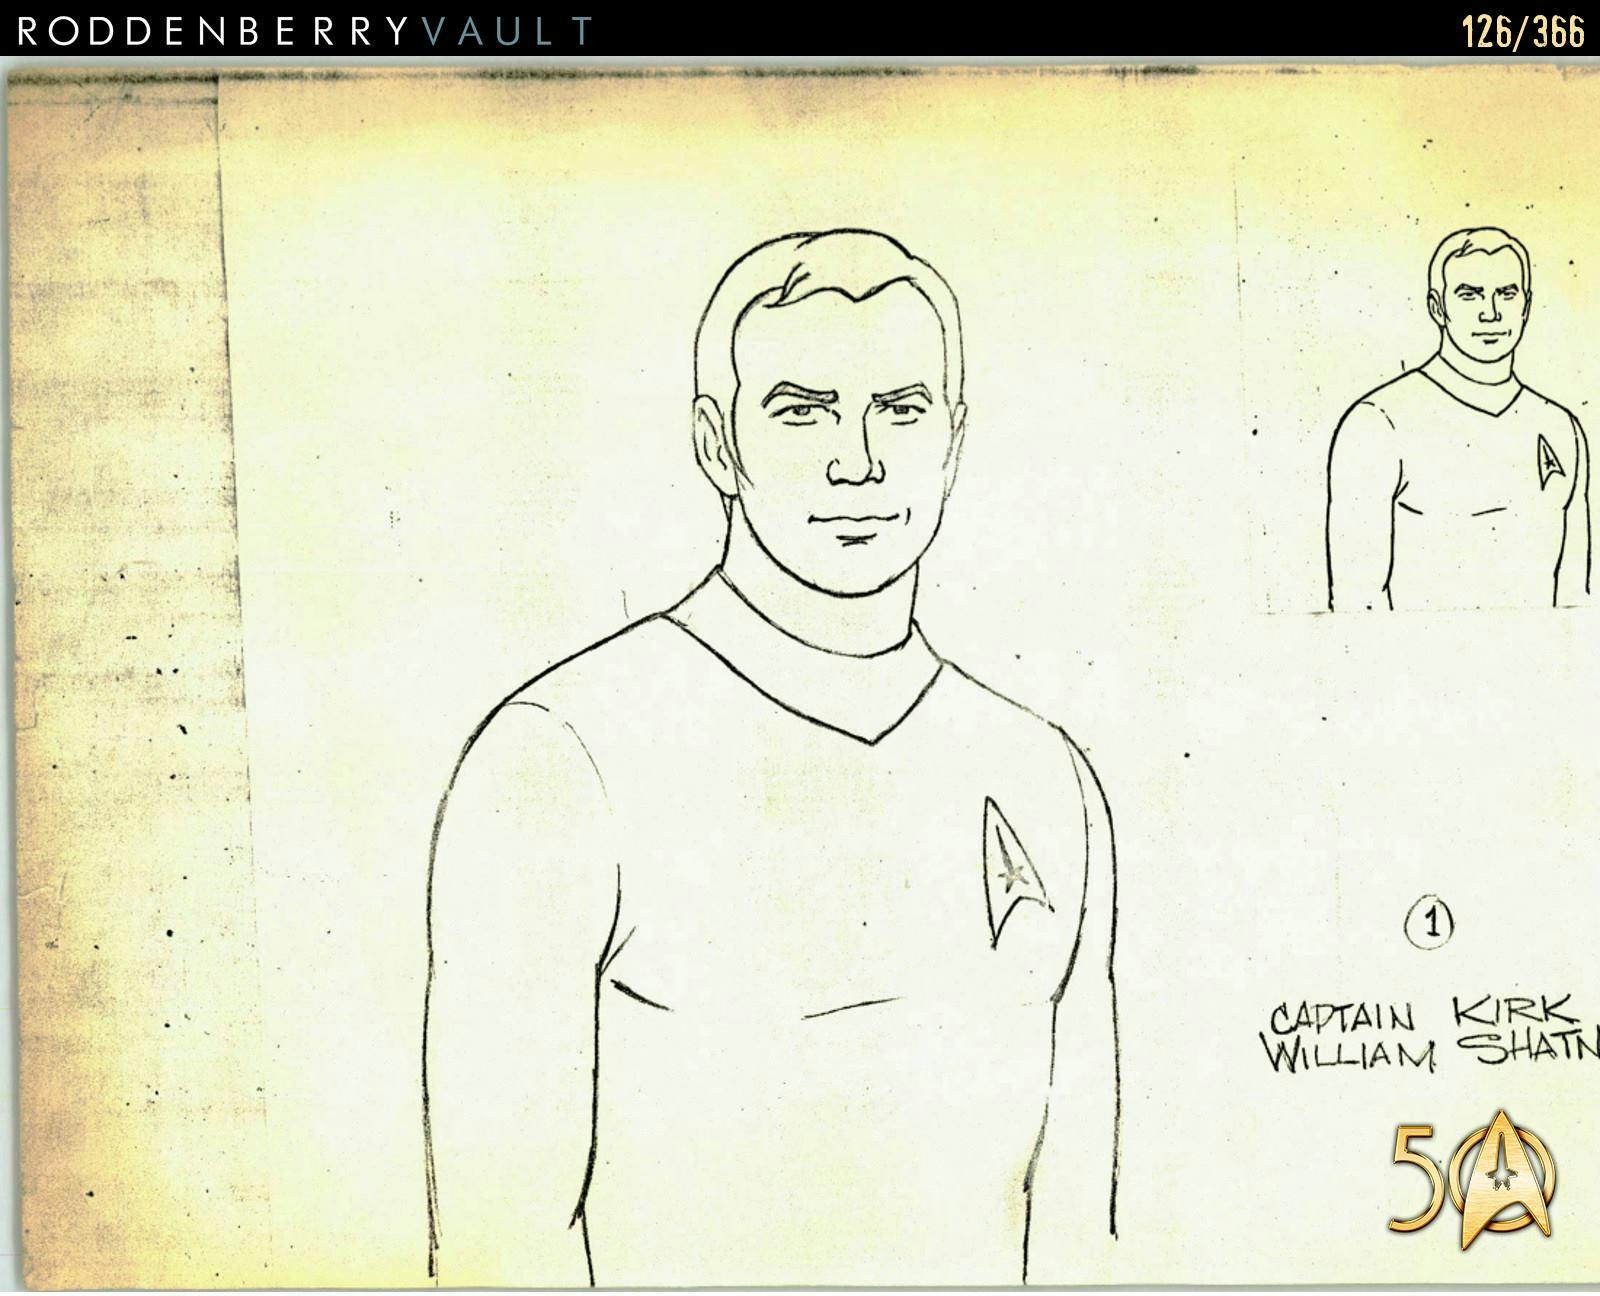 From the Roddenberry 366 Vault - The Animated Series - concept art of Captain Kirk